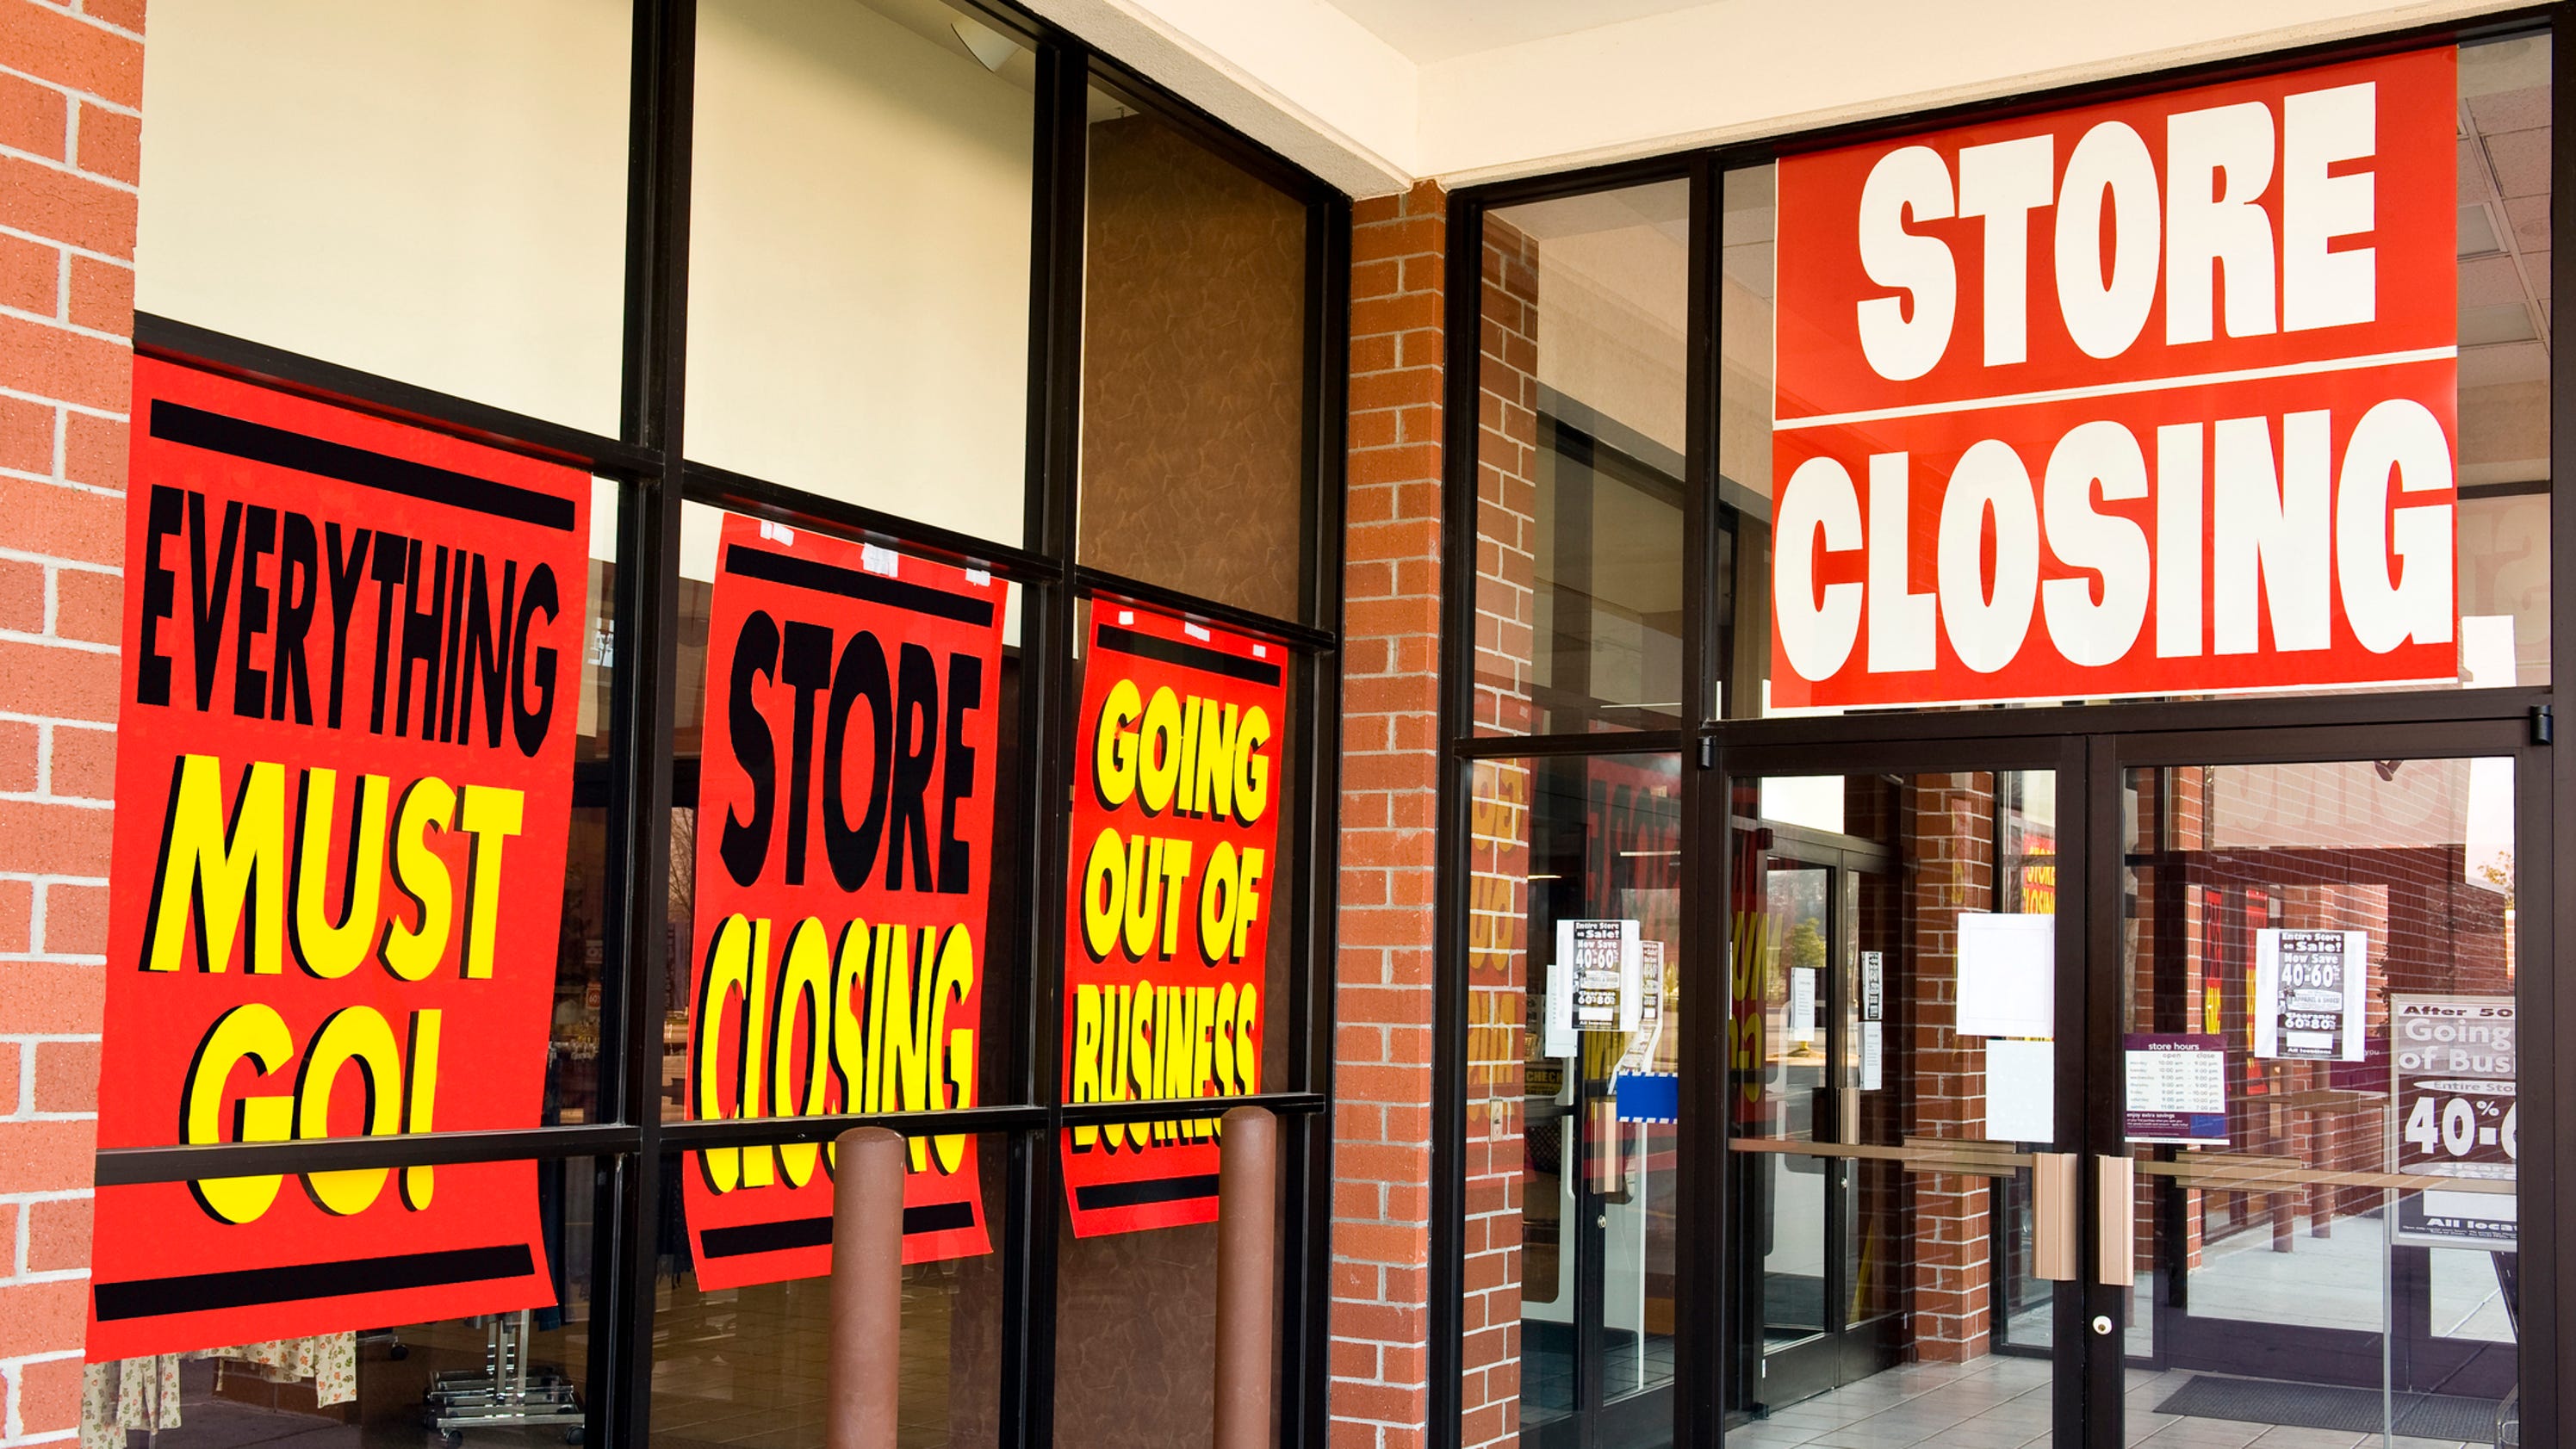 Here’s how to get the best deals at a going out of business sale